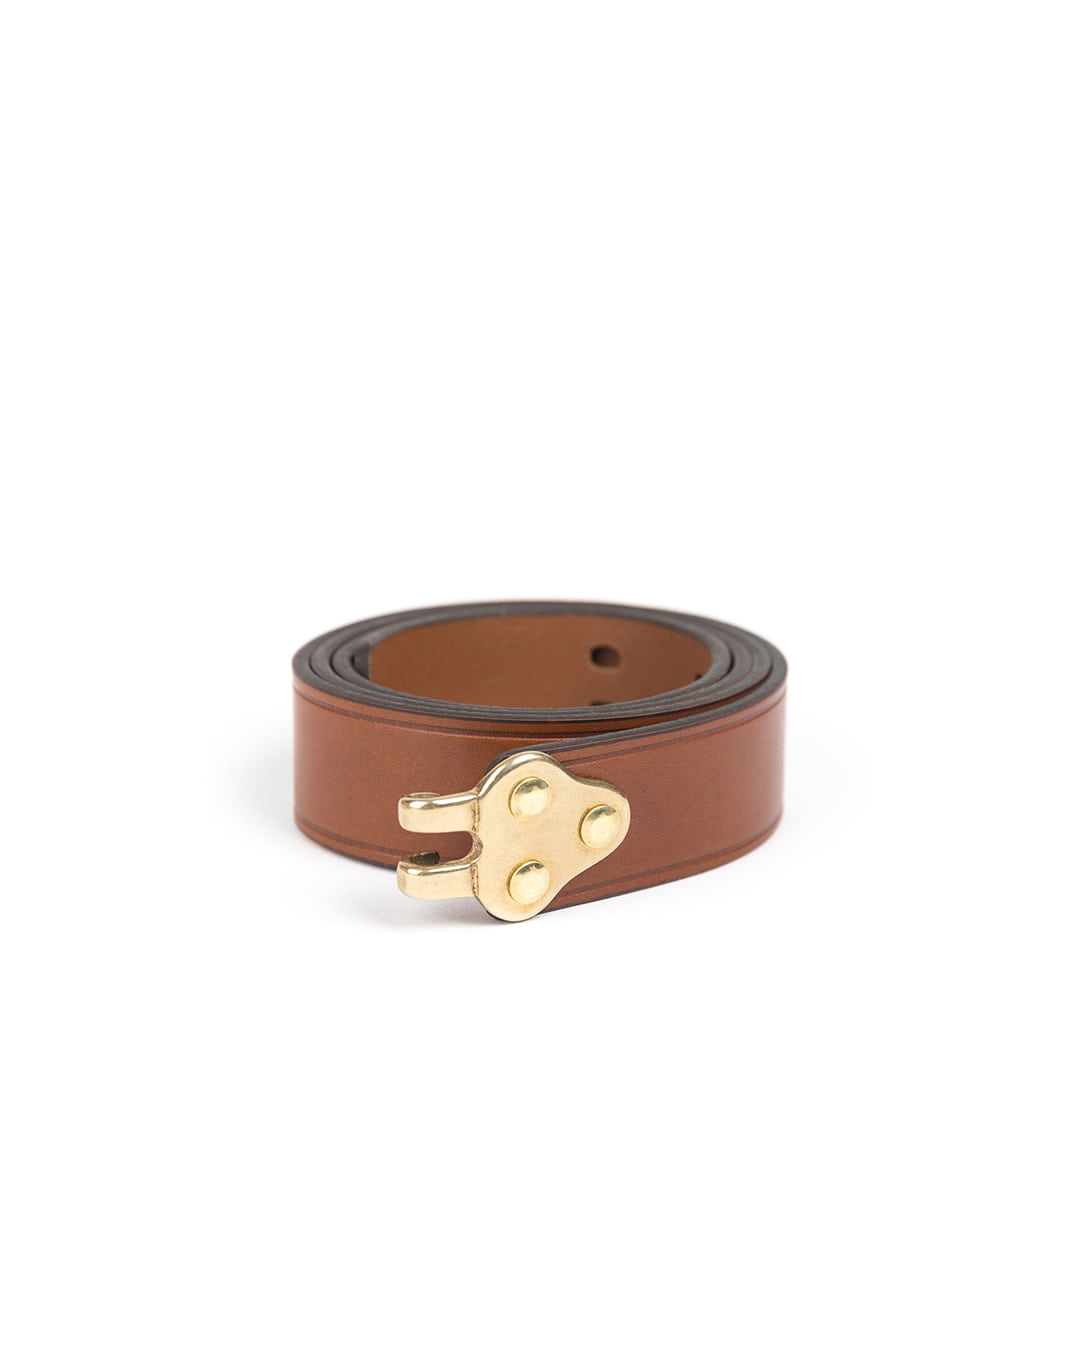 RIFLE SLING LEATHER BELT (brown)